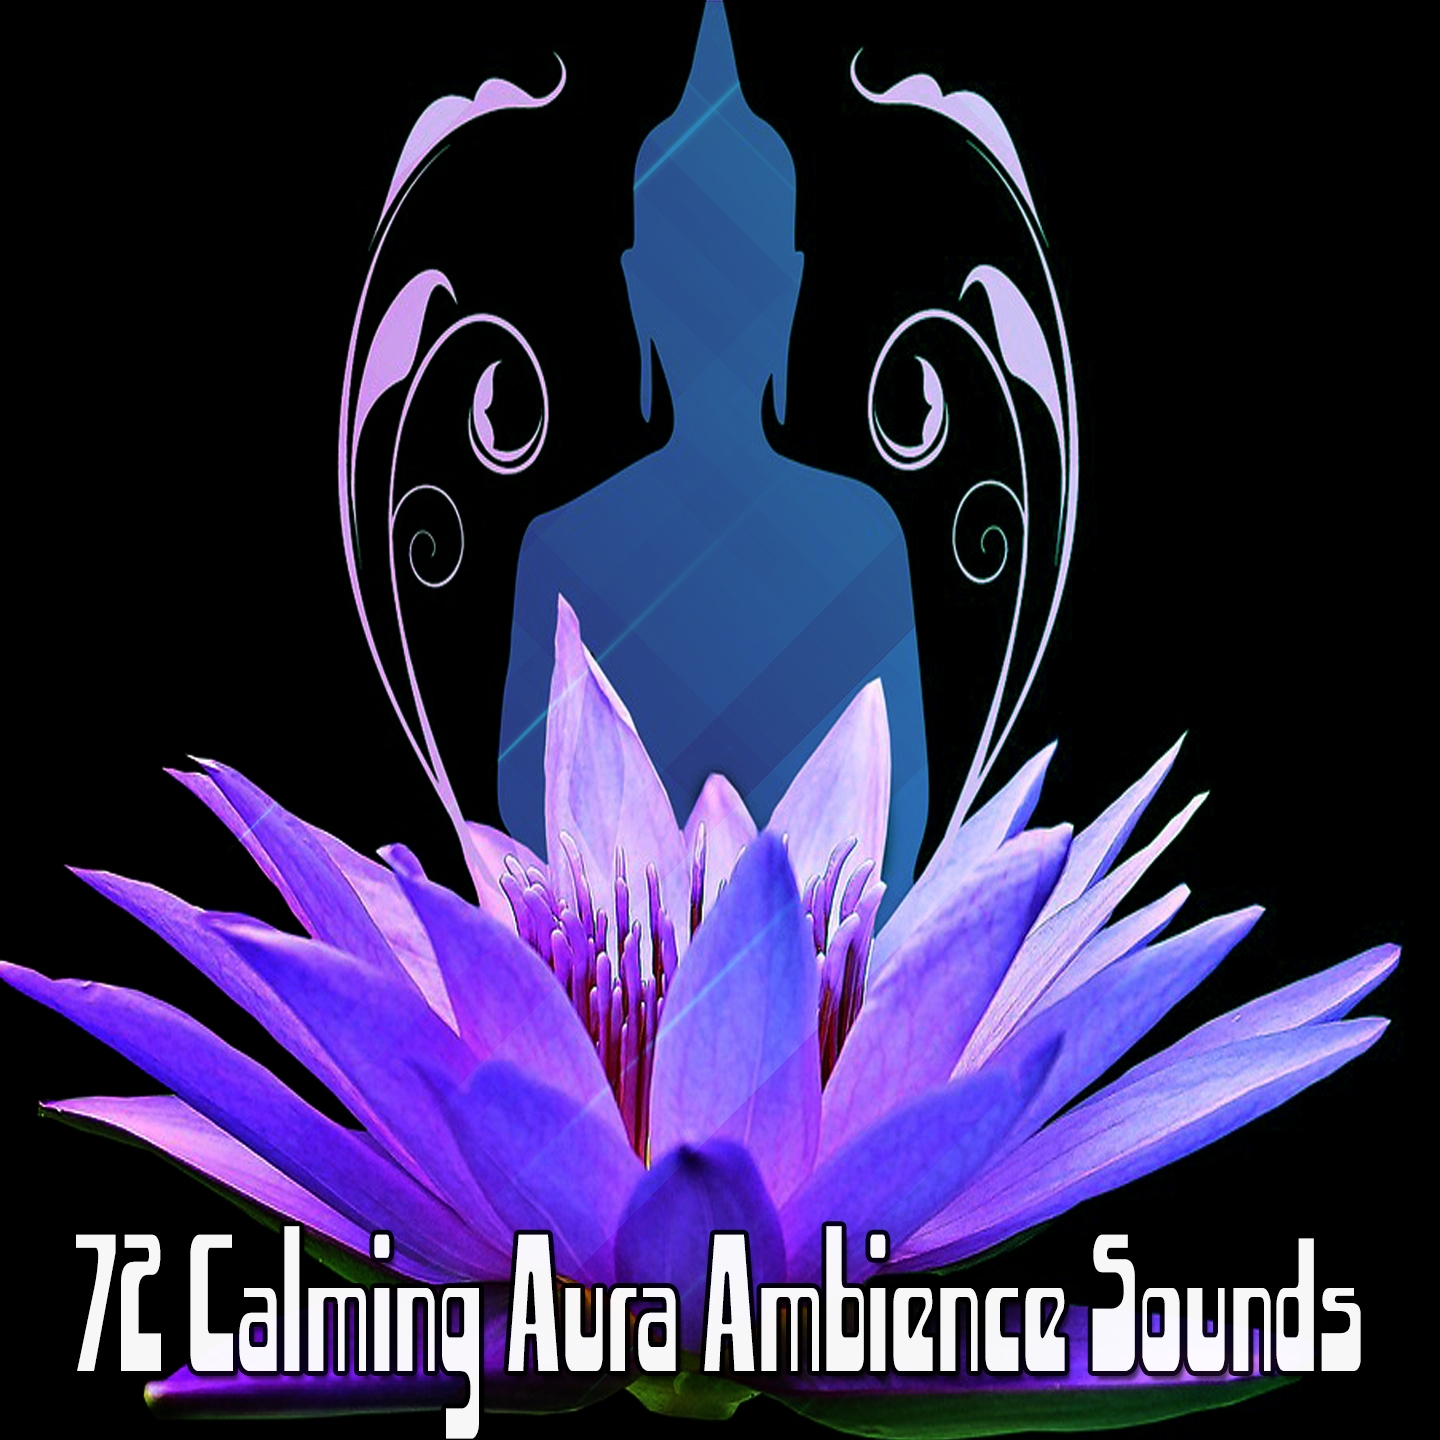 72 Calming Aura Ambience Sounds